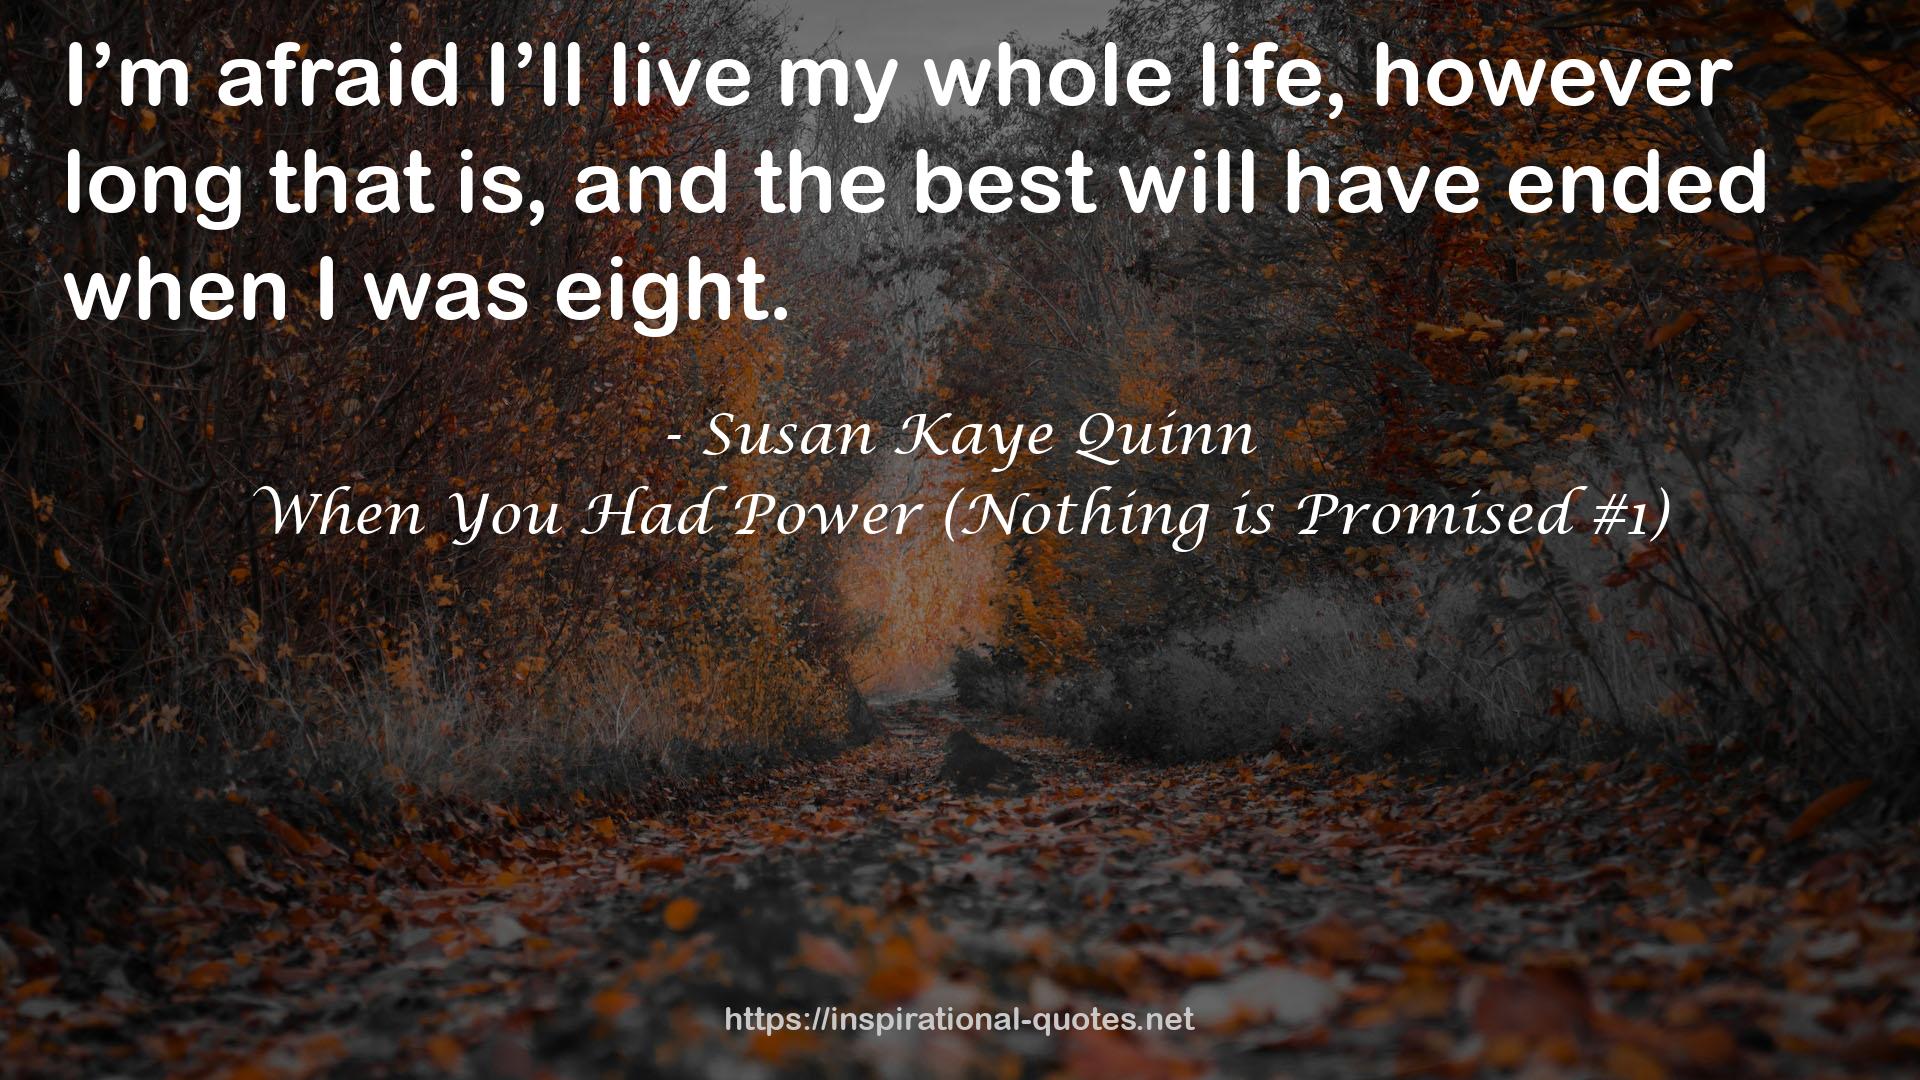 When You Had Power (Nothing is Promised #1) QUOTES